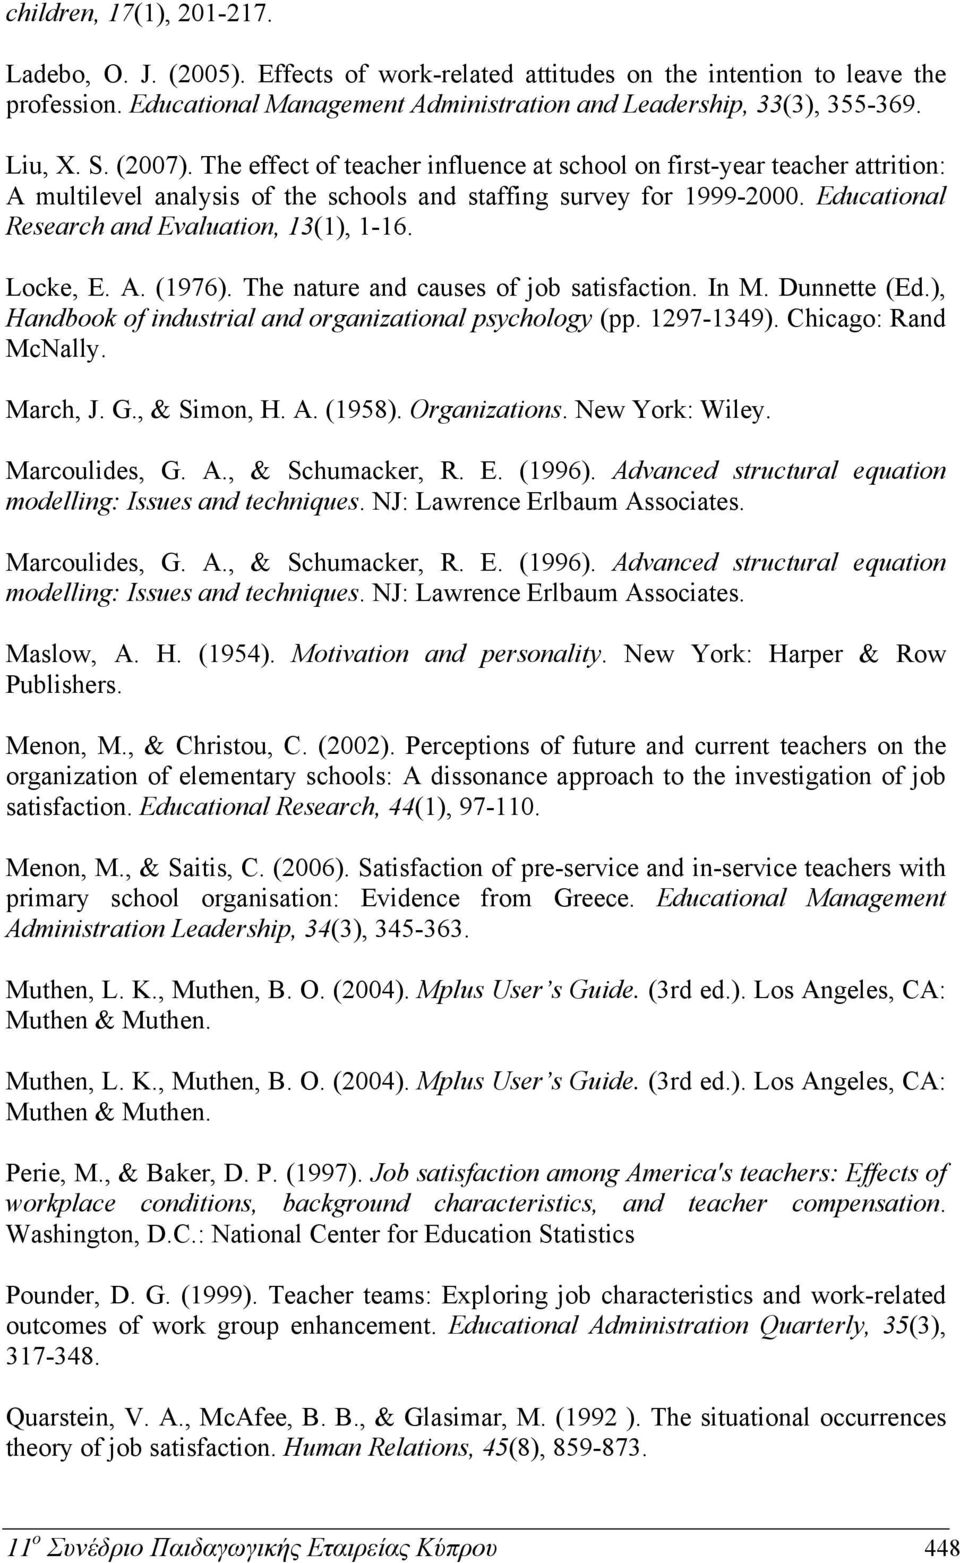 Educational Research and Evaluation, 13(1), 1-16. Locke, E. A. (1976). The nature and causes of job satisfaction. In M. Dunnette (Ed.), Handbook of industrial and organizational psychology (pp.